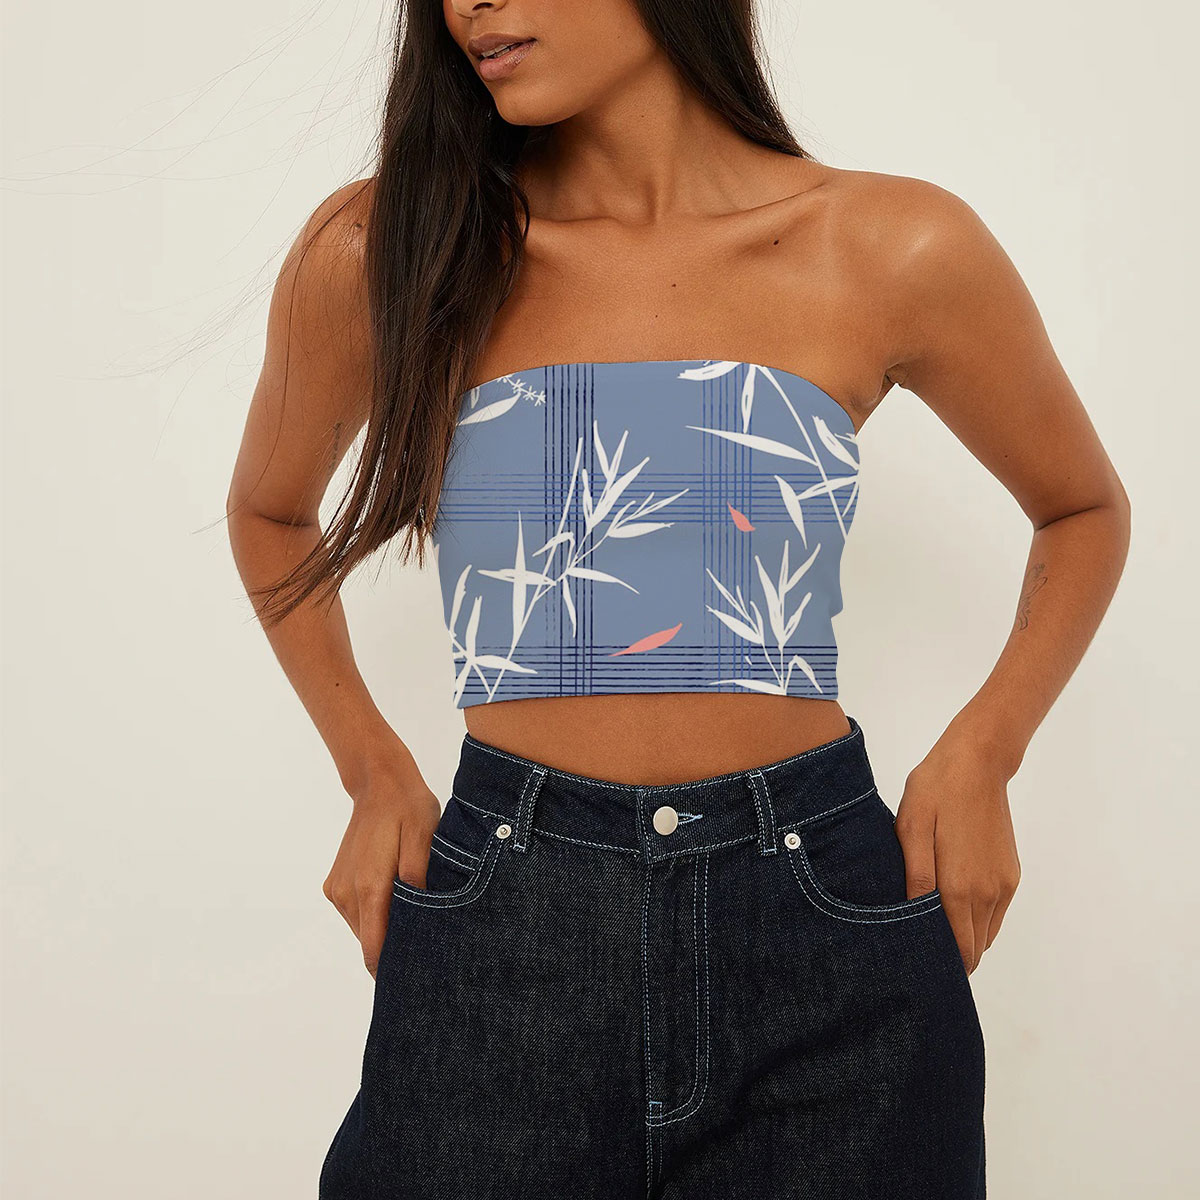 Beautiful With Bamboo Leaves On Blue Tube Top